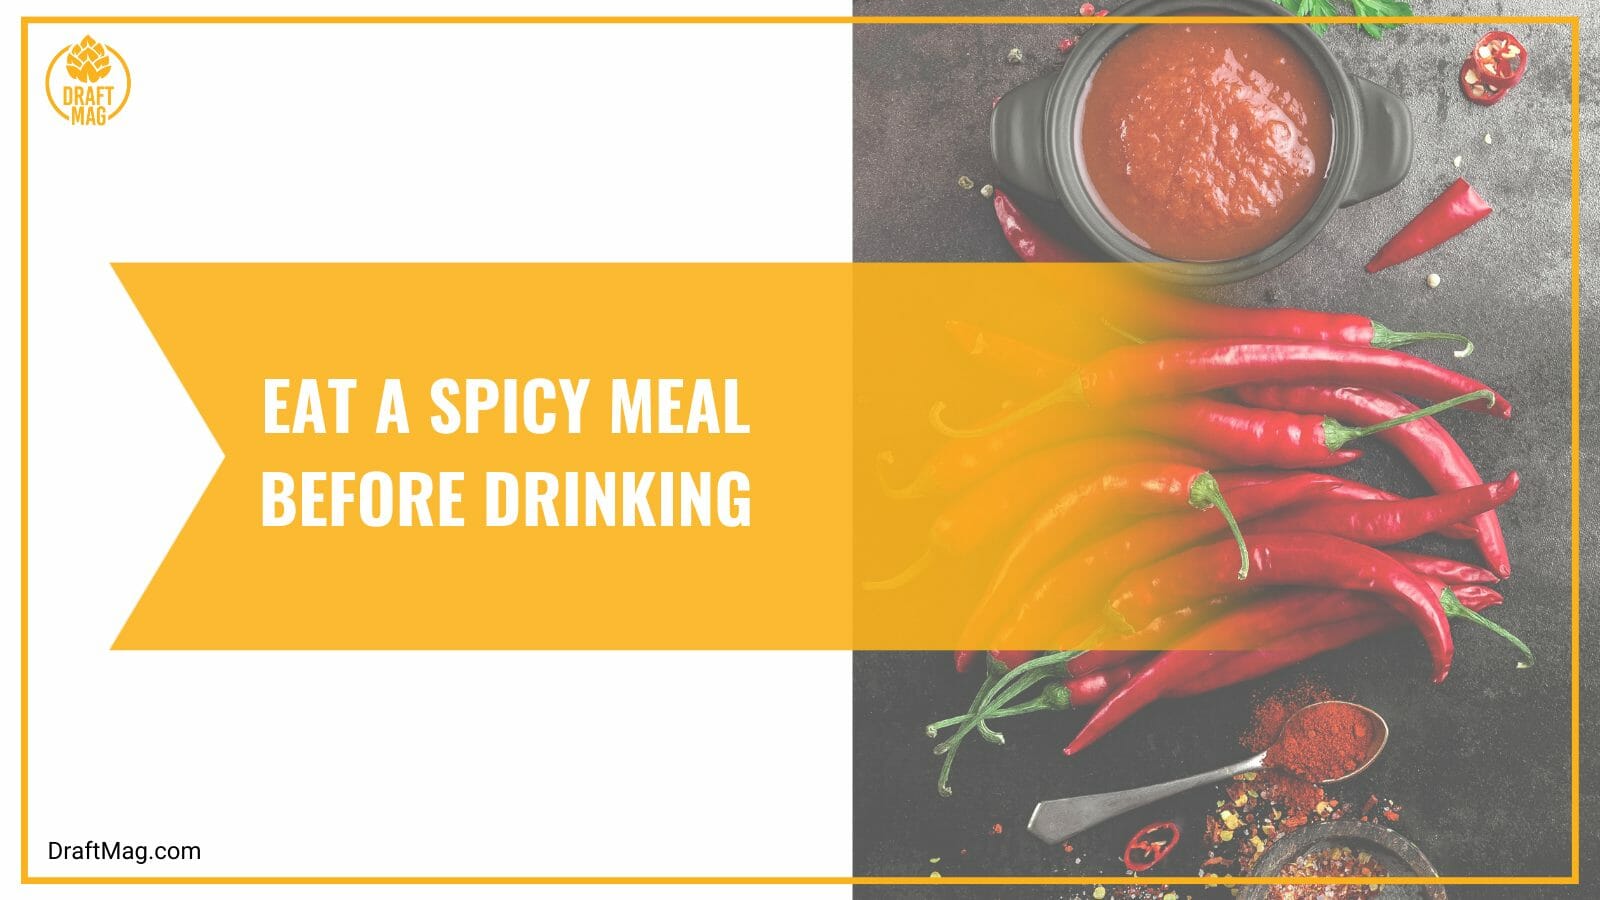 Eat a spicy meal before drinking beer